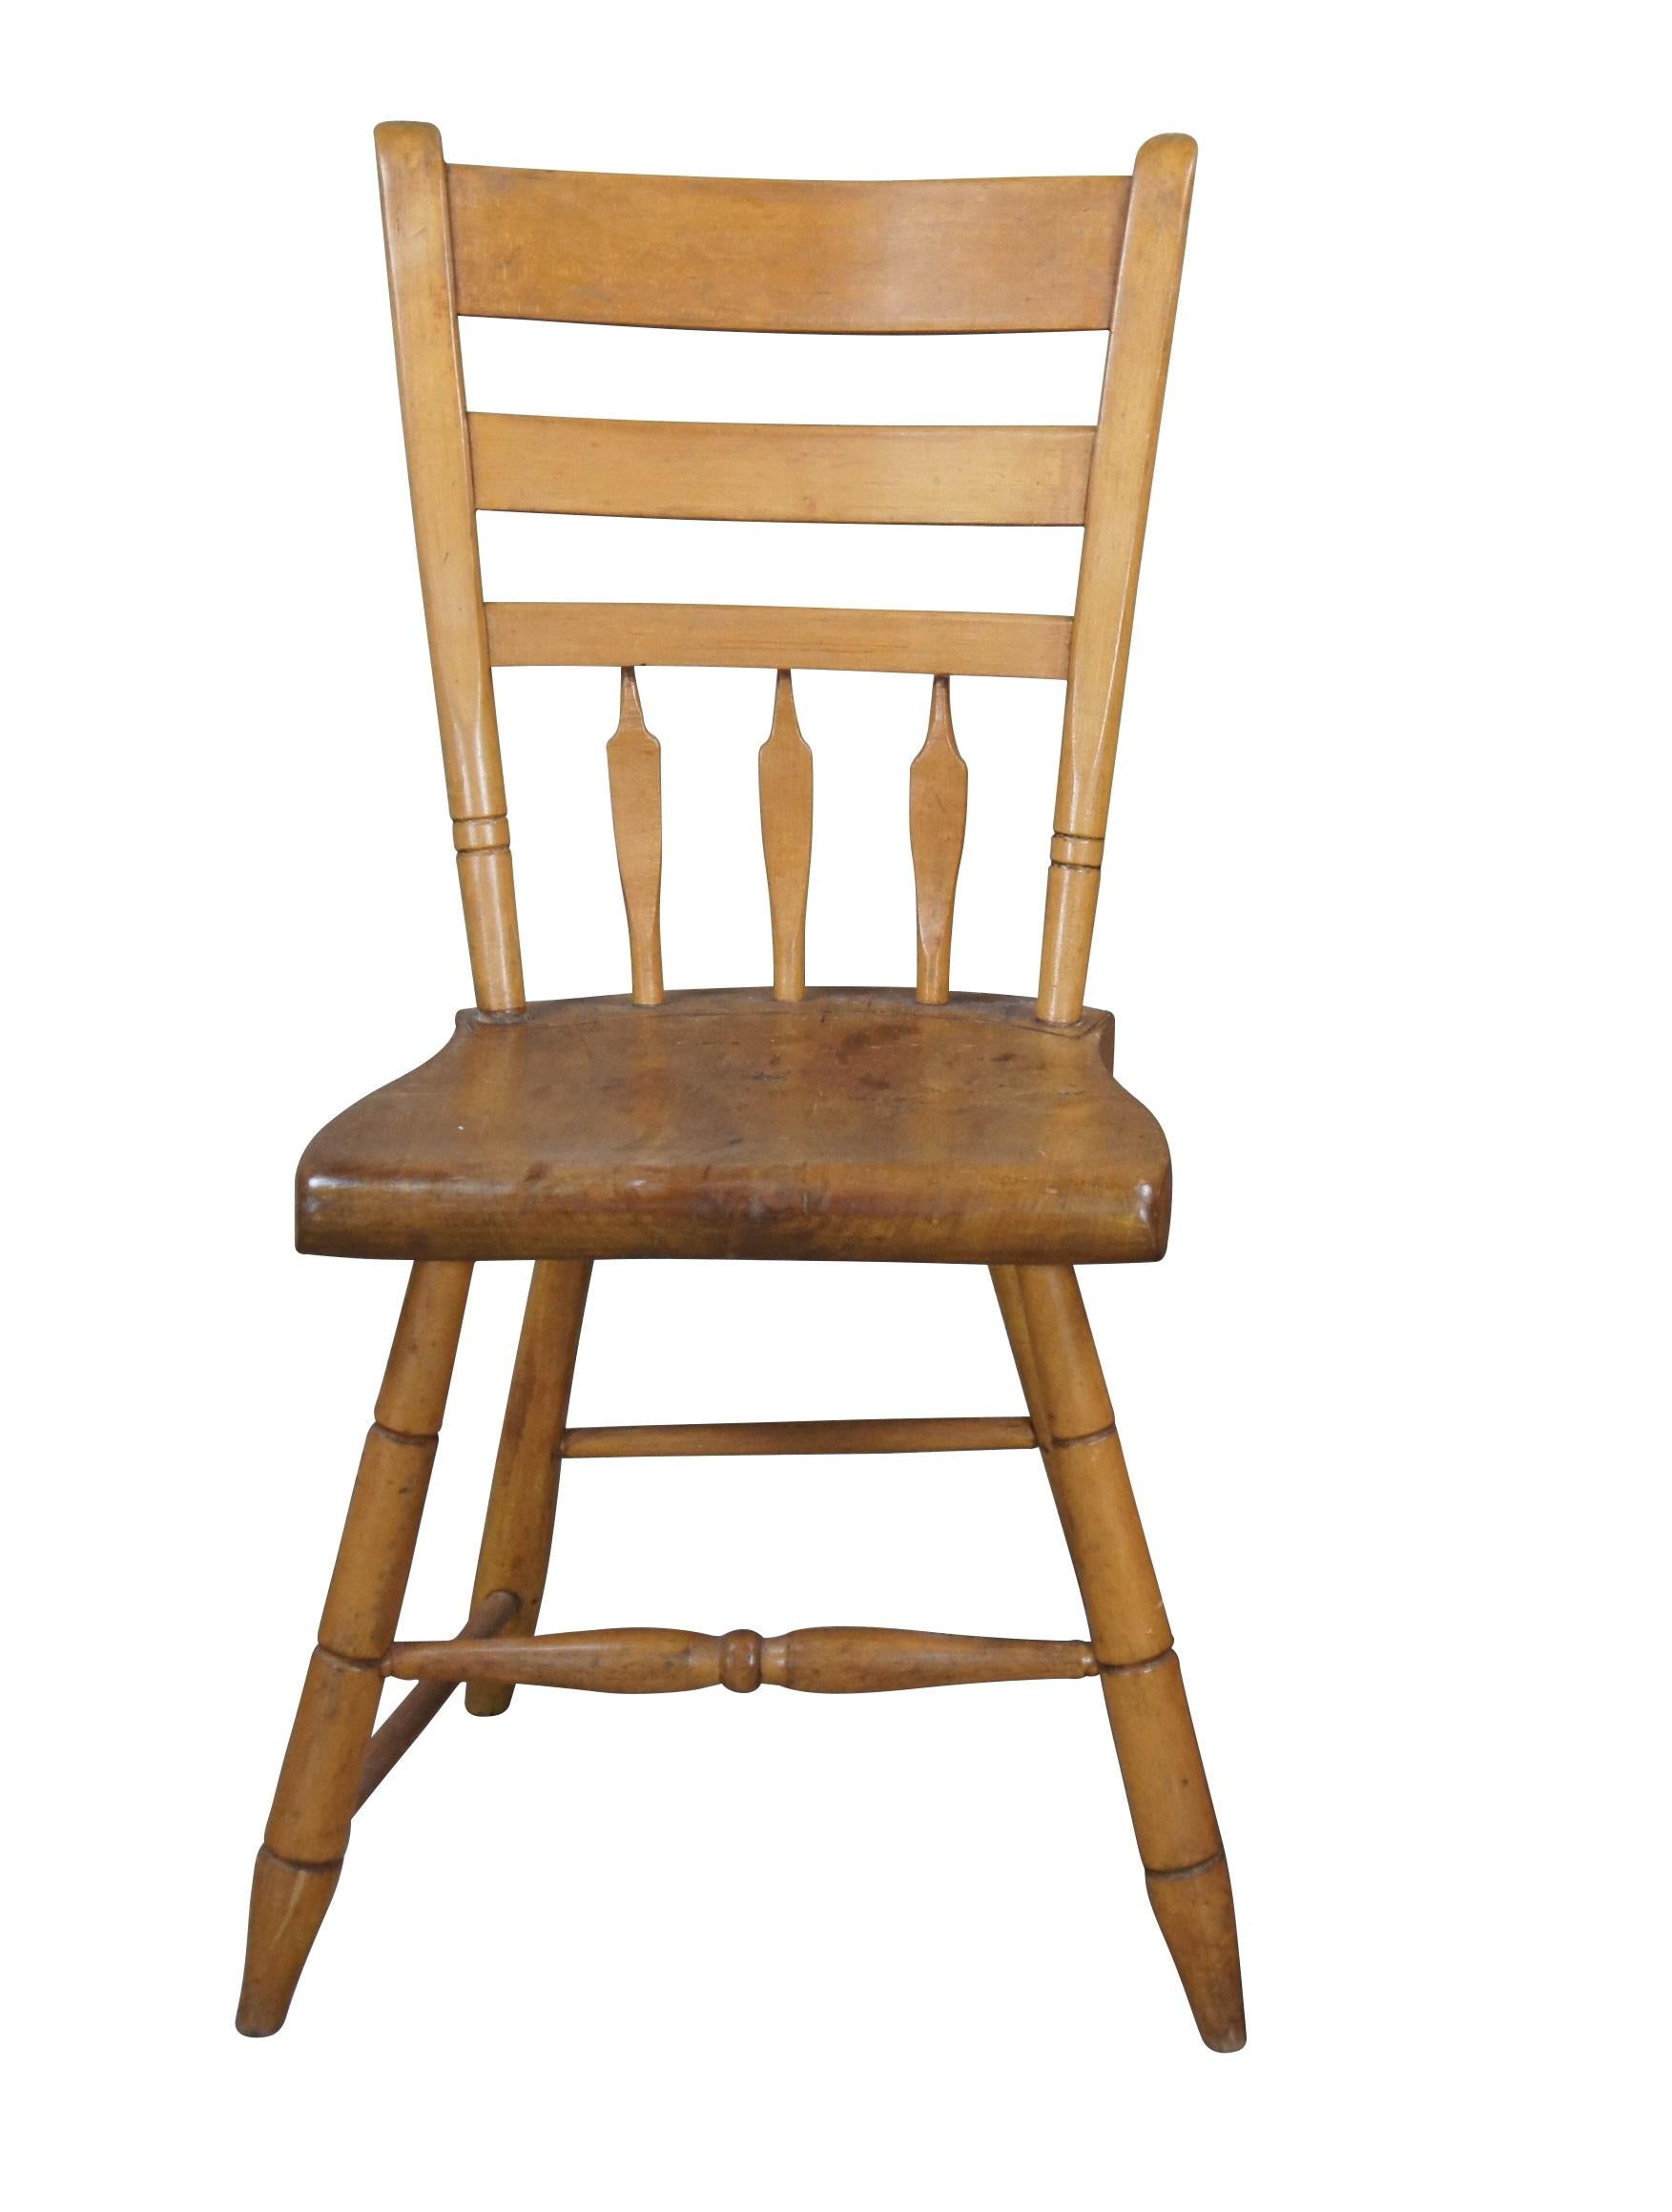  19th century Windsor dining chair.  Made from maple with arrow splats, plank seat and turned legs.

Dimensions:
16